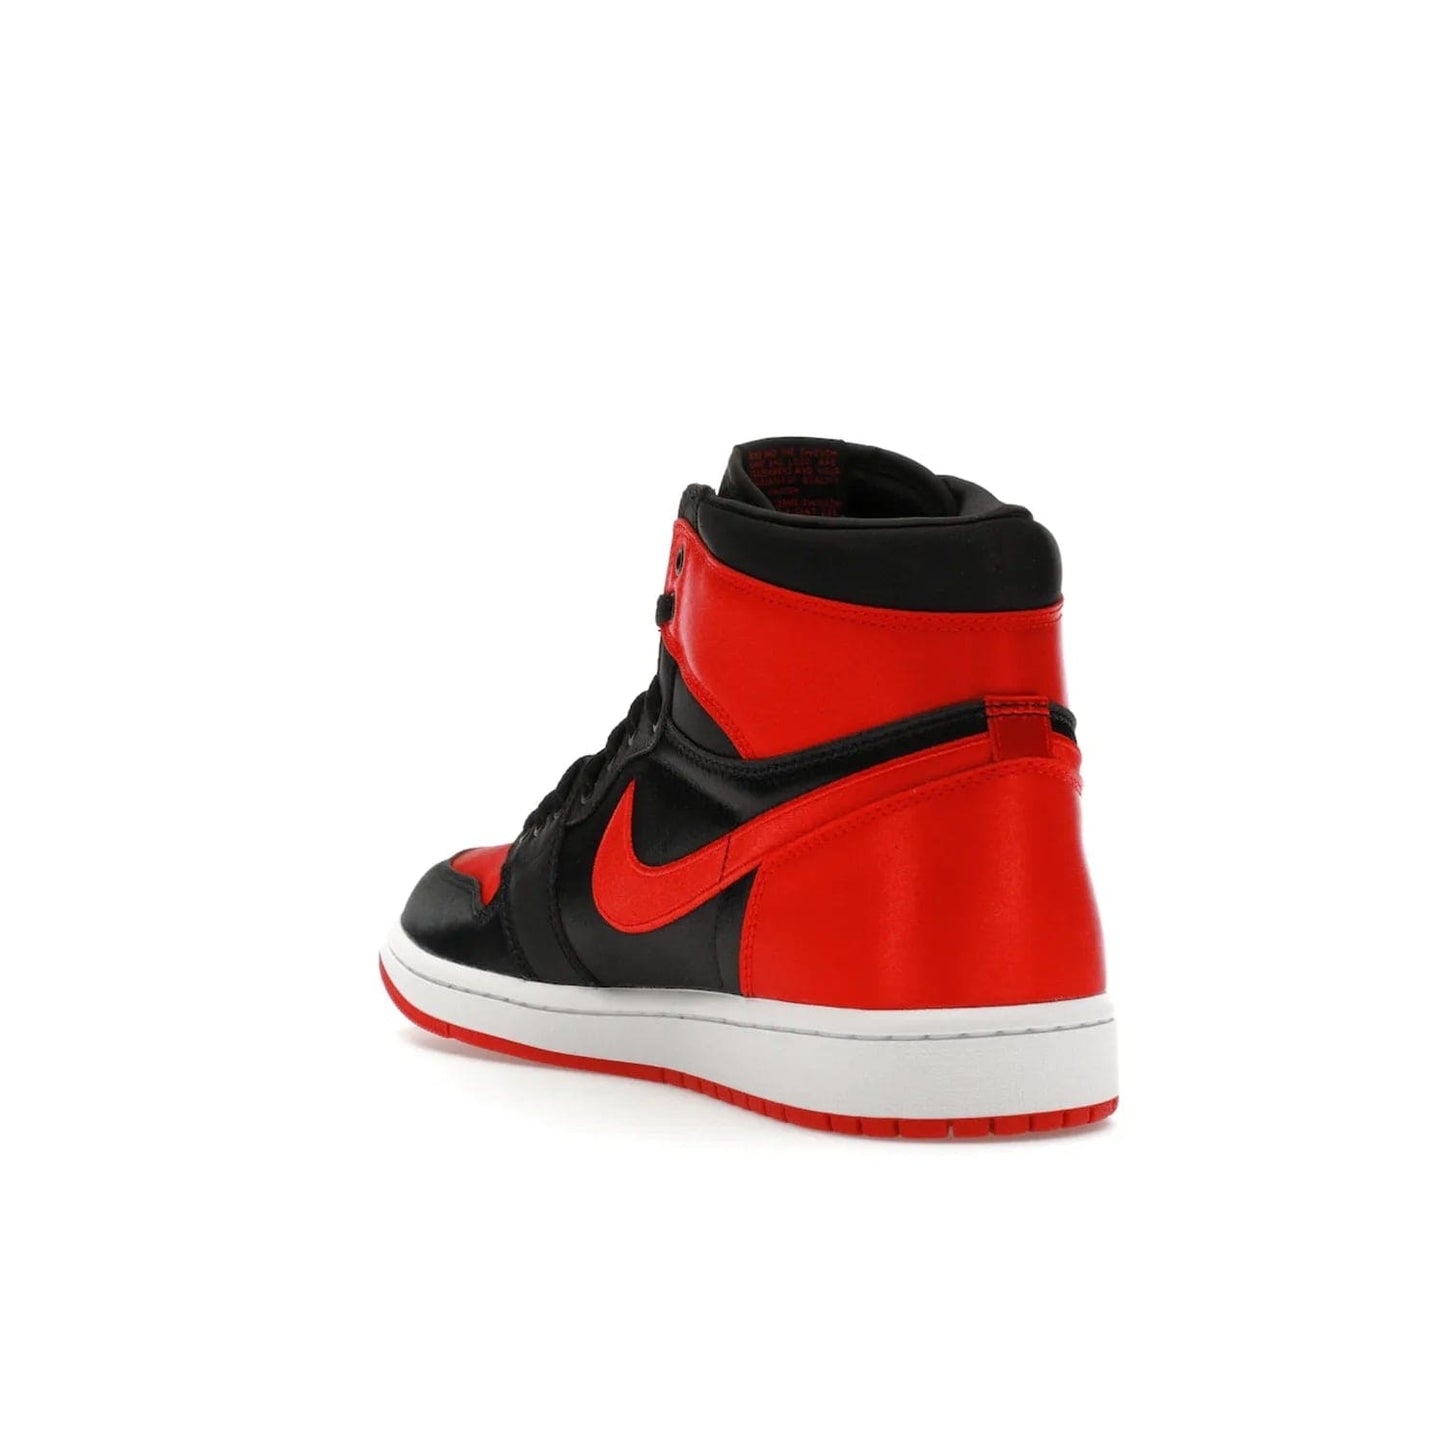 Jordan 1 Retro High OG Satin Bred (Women's) - Image 25 - Only at www.BallersClubKickz.com - Introducing the Jordan 1 Retro High OG Satin Bred (Women's). Luxe satin finish, contrasting hues & classic accents. Trending sneakers symbolizing timelessness & heritage. Make a bold statement with this iconic shoe. Available October 4, 2023.